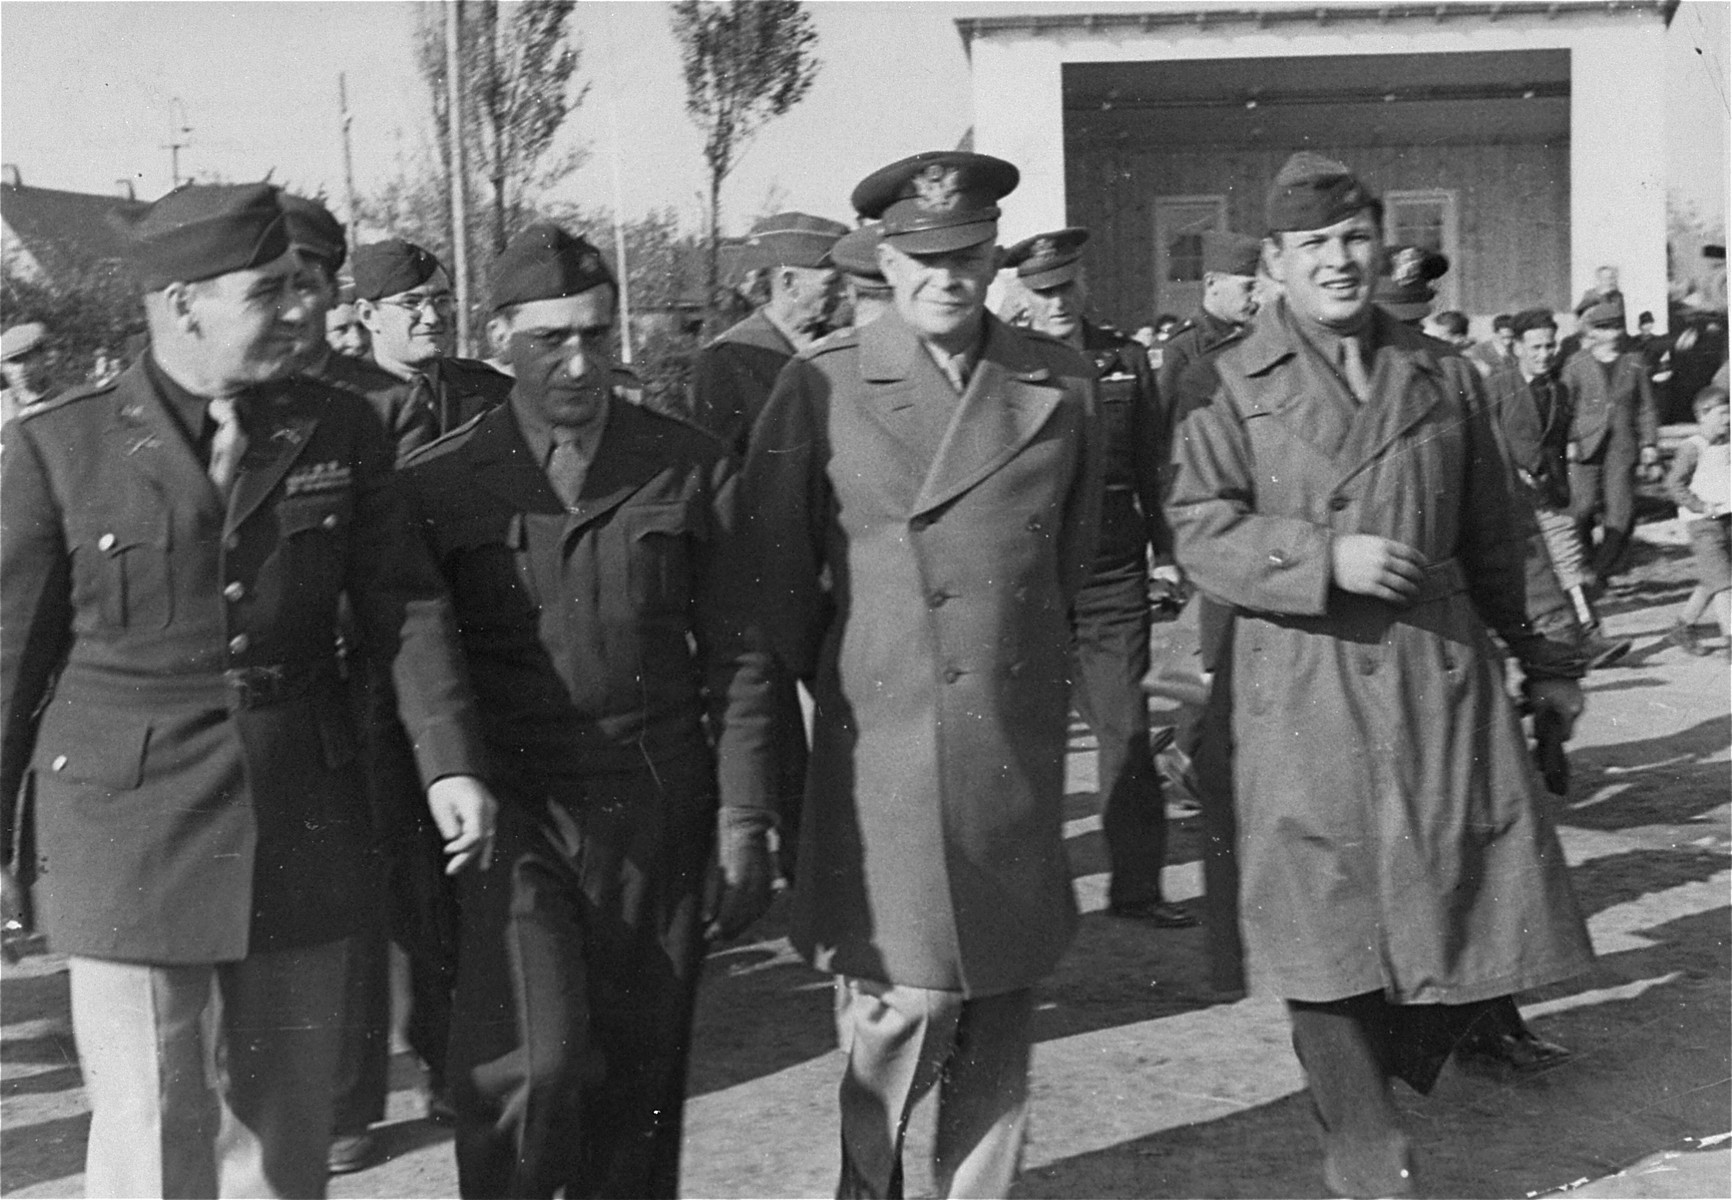 Camp director Saul Sorrin gives General Dwight Eisenhower a tour of the Neu Freimann displaced persons camp.

Eisenhower's visits to Neu Freimann and other displaced persons' camps in the fall of 1945 was prompted by a strongly worded cable he received  from President Truman directing him to institute reforms to improve living conditions of displaced Jews in the American zone of occupation.